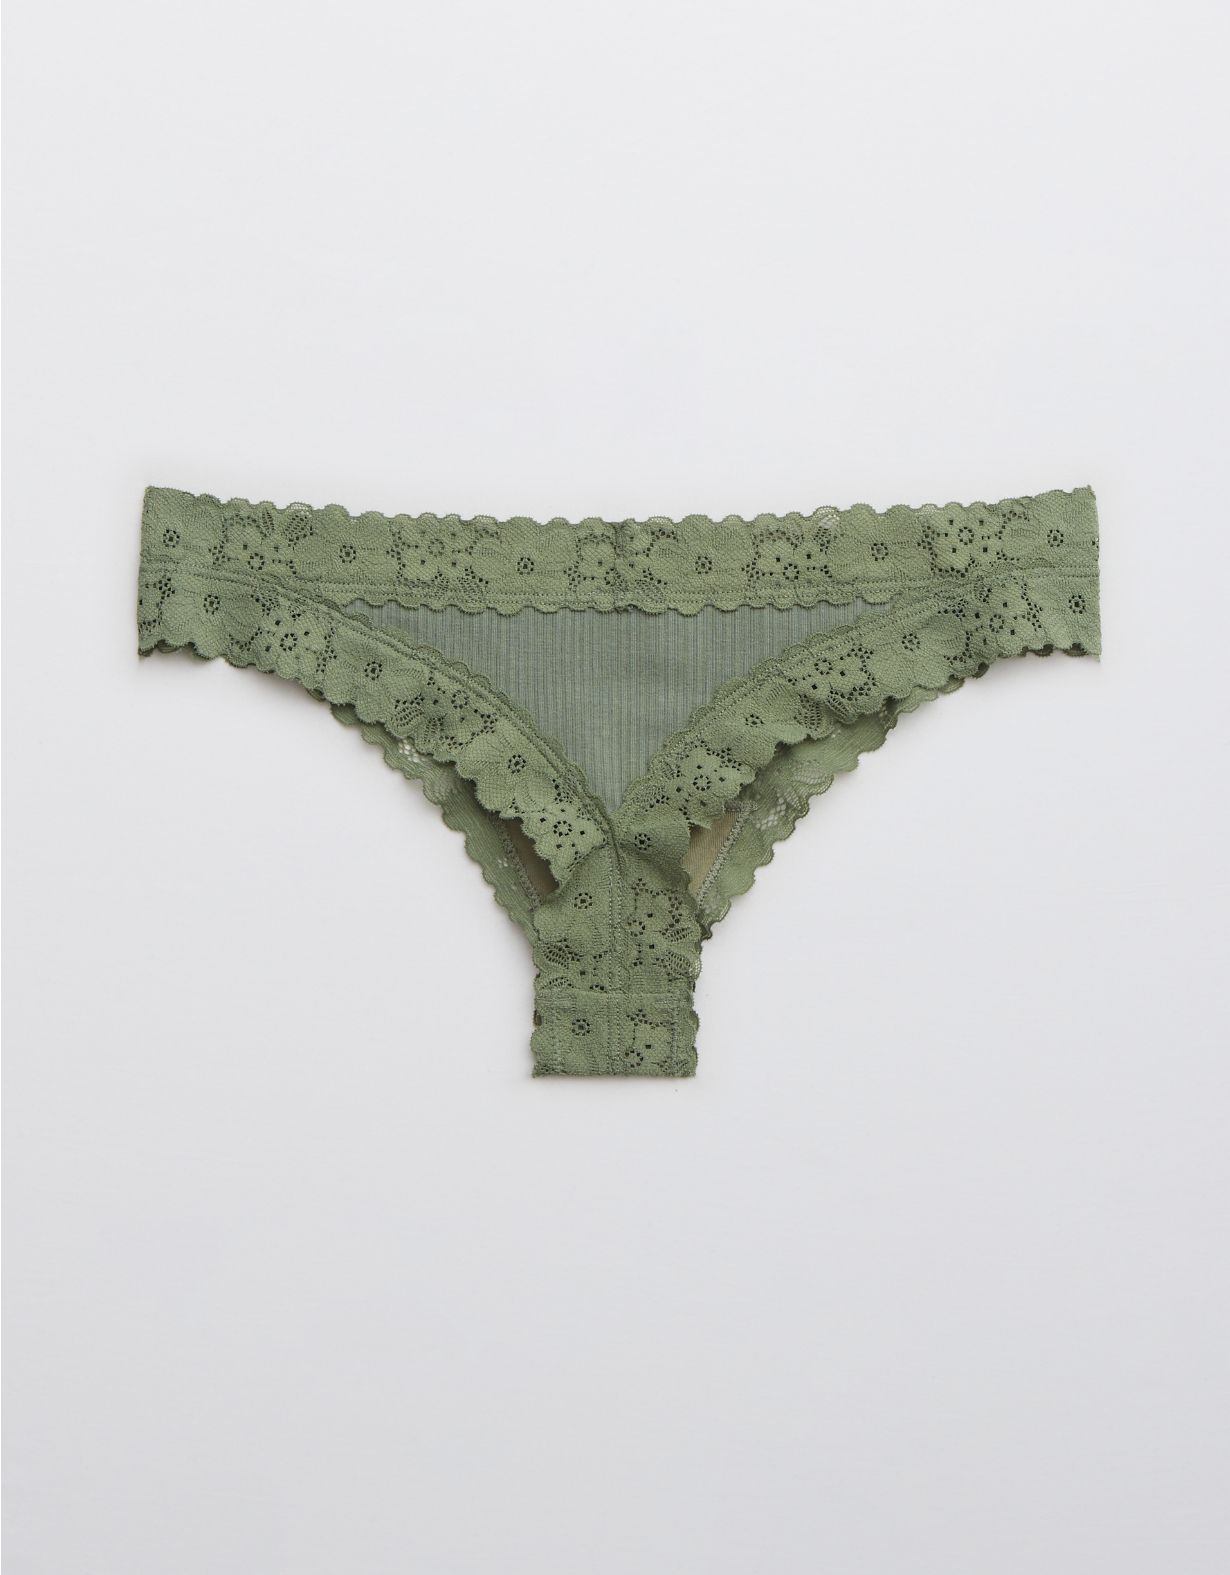 Aerie Ribbed Retro Lace Thong Underwear